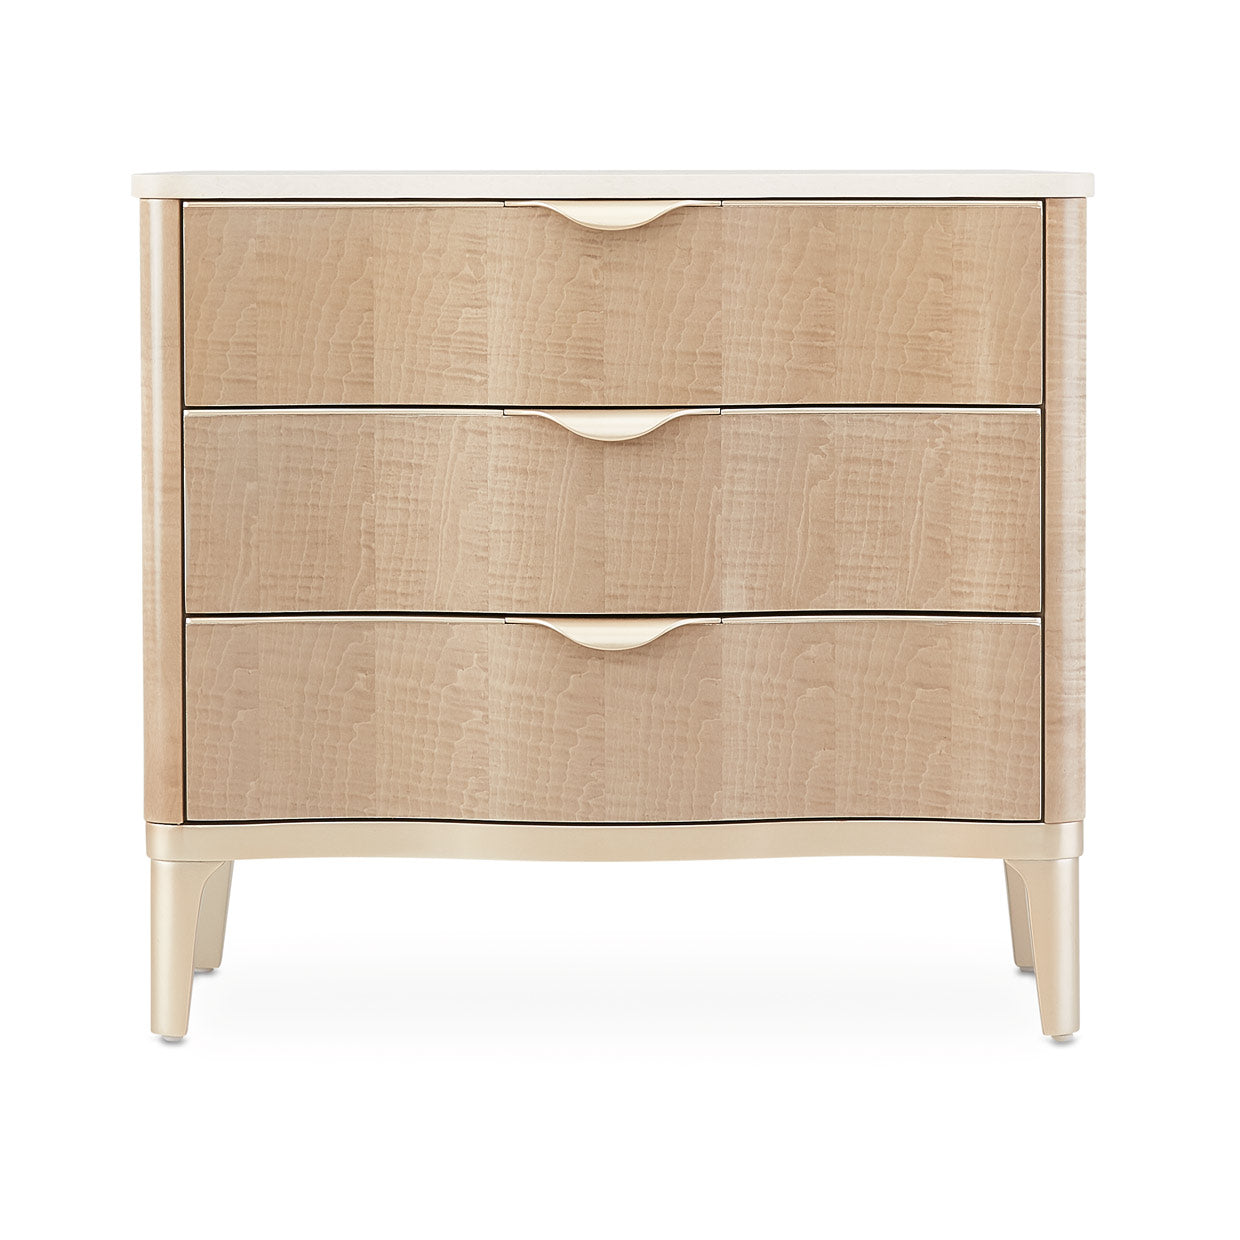 Malibu Crest Nightstand, Maple veneers, Waterfall handles, Cultured marble top, Hardwood solids, Blush finish, Chardonnay accents, Velvet lined drawers, Self-closing glides, Curved pulls, Pearl toned cultured marble, Bedroom furniture, dream art, Michael amini